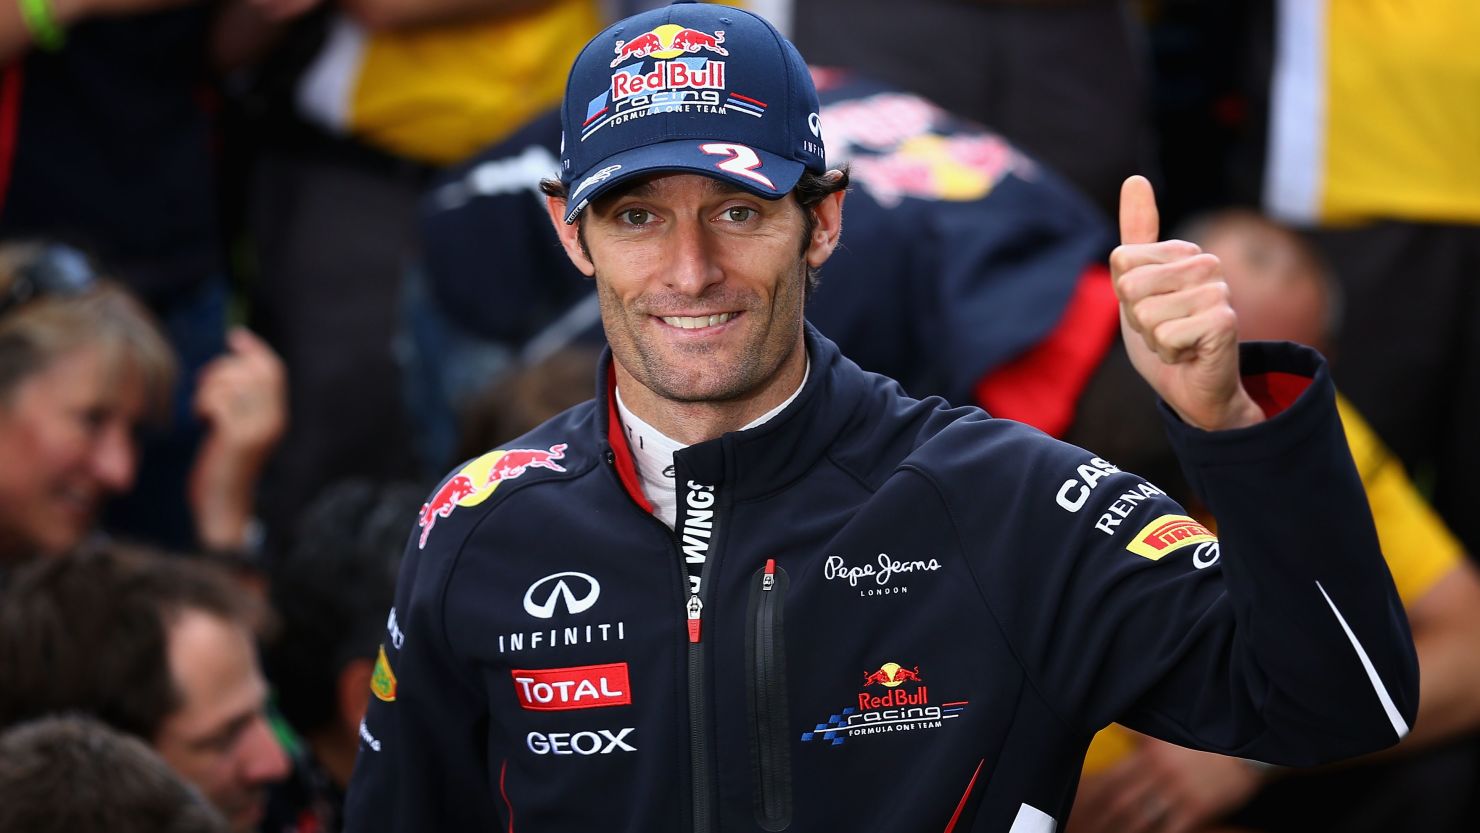 Mark Webber and Fernando Alonso are the only drivers to win more than one F1 race in the 2012 season so far